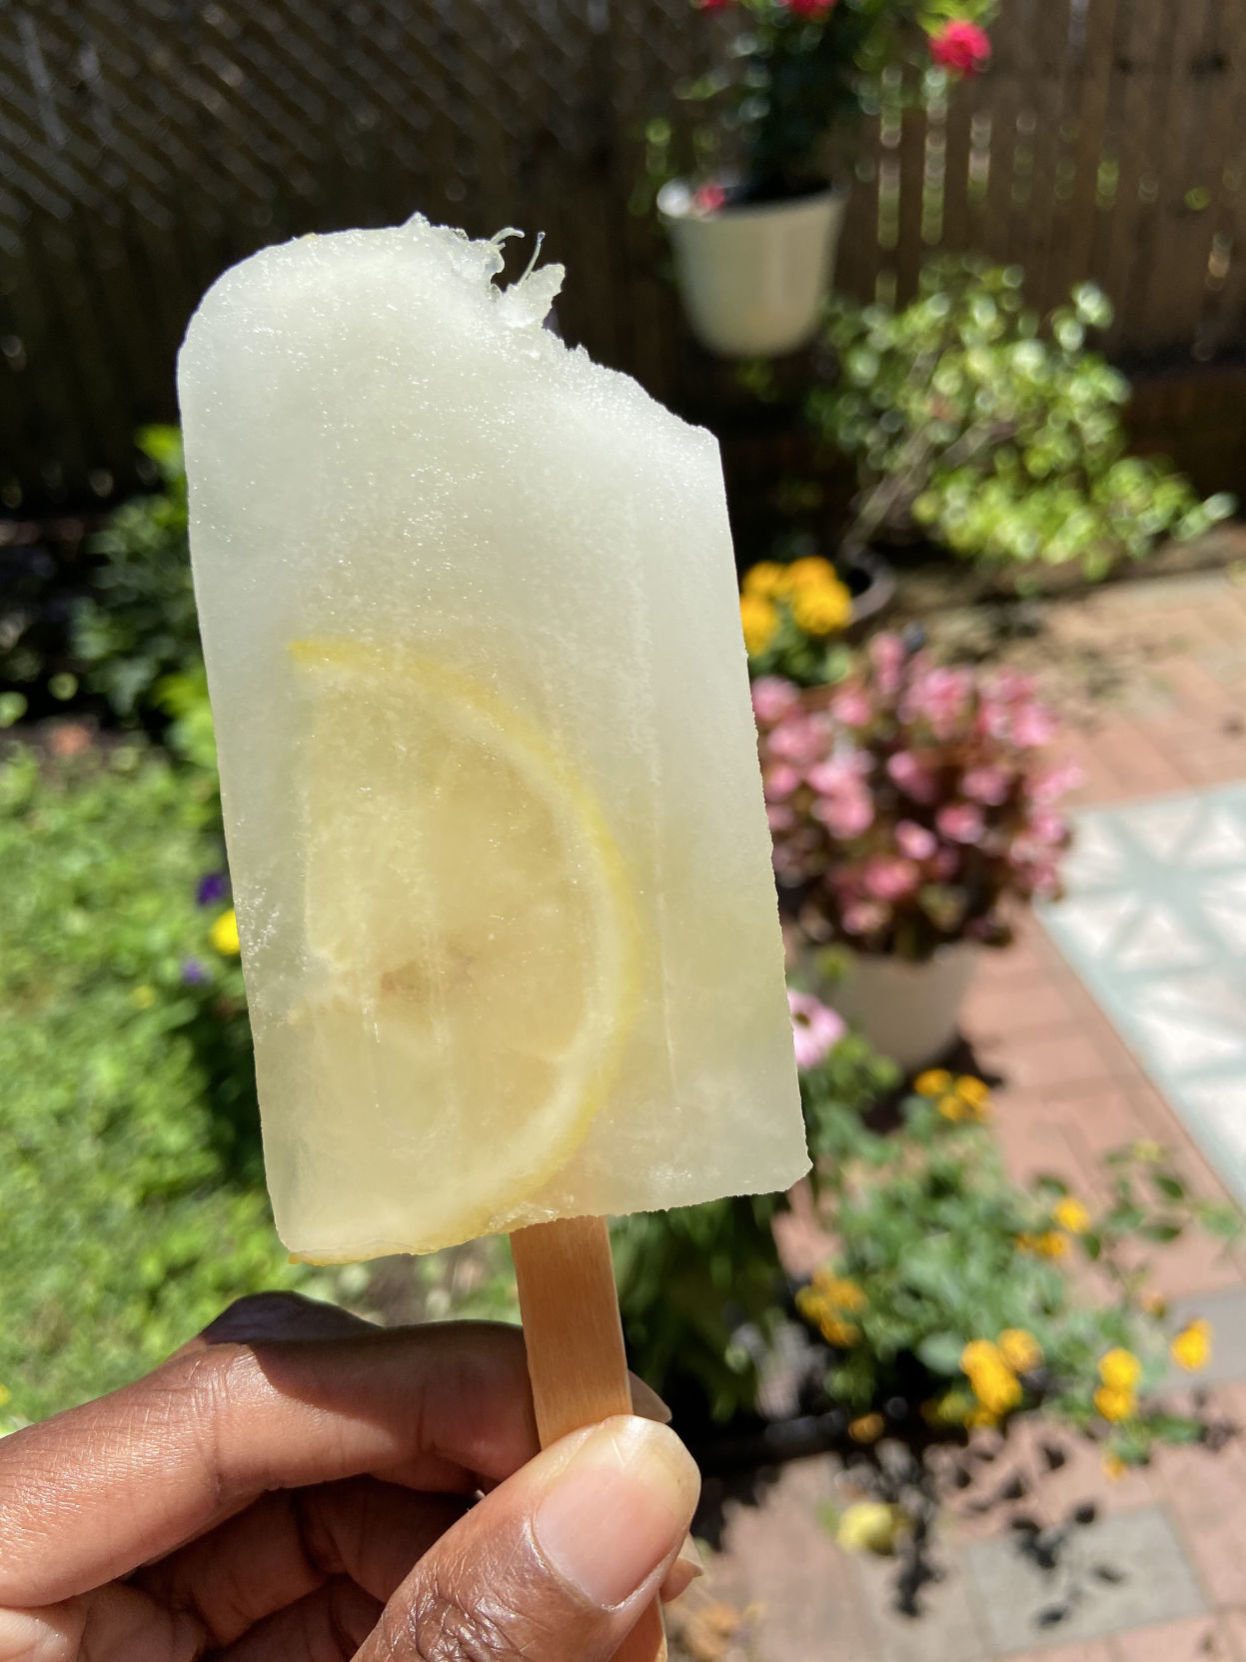 Ice pops and cream pops make an easy, cool summer snack Lifestyles lompocrecord